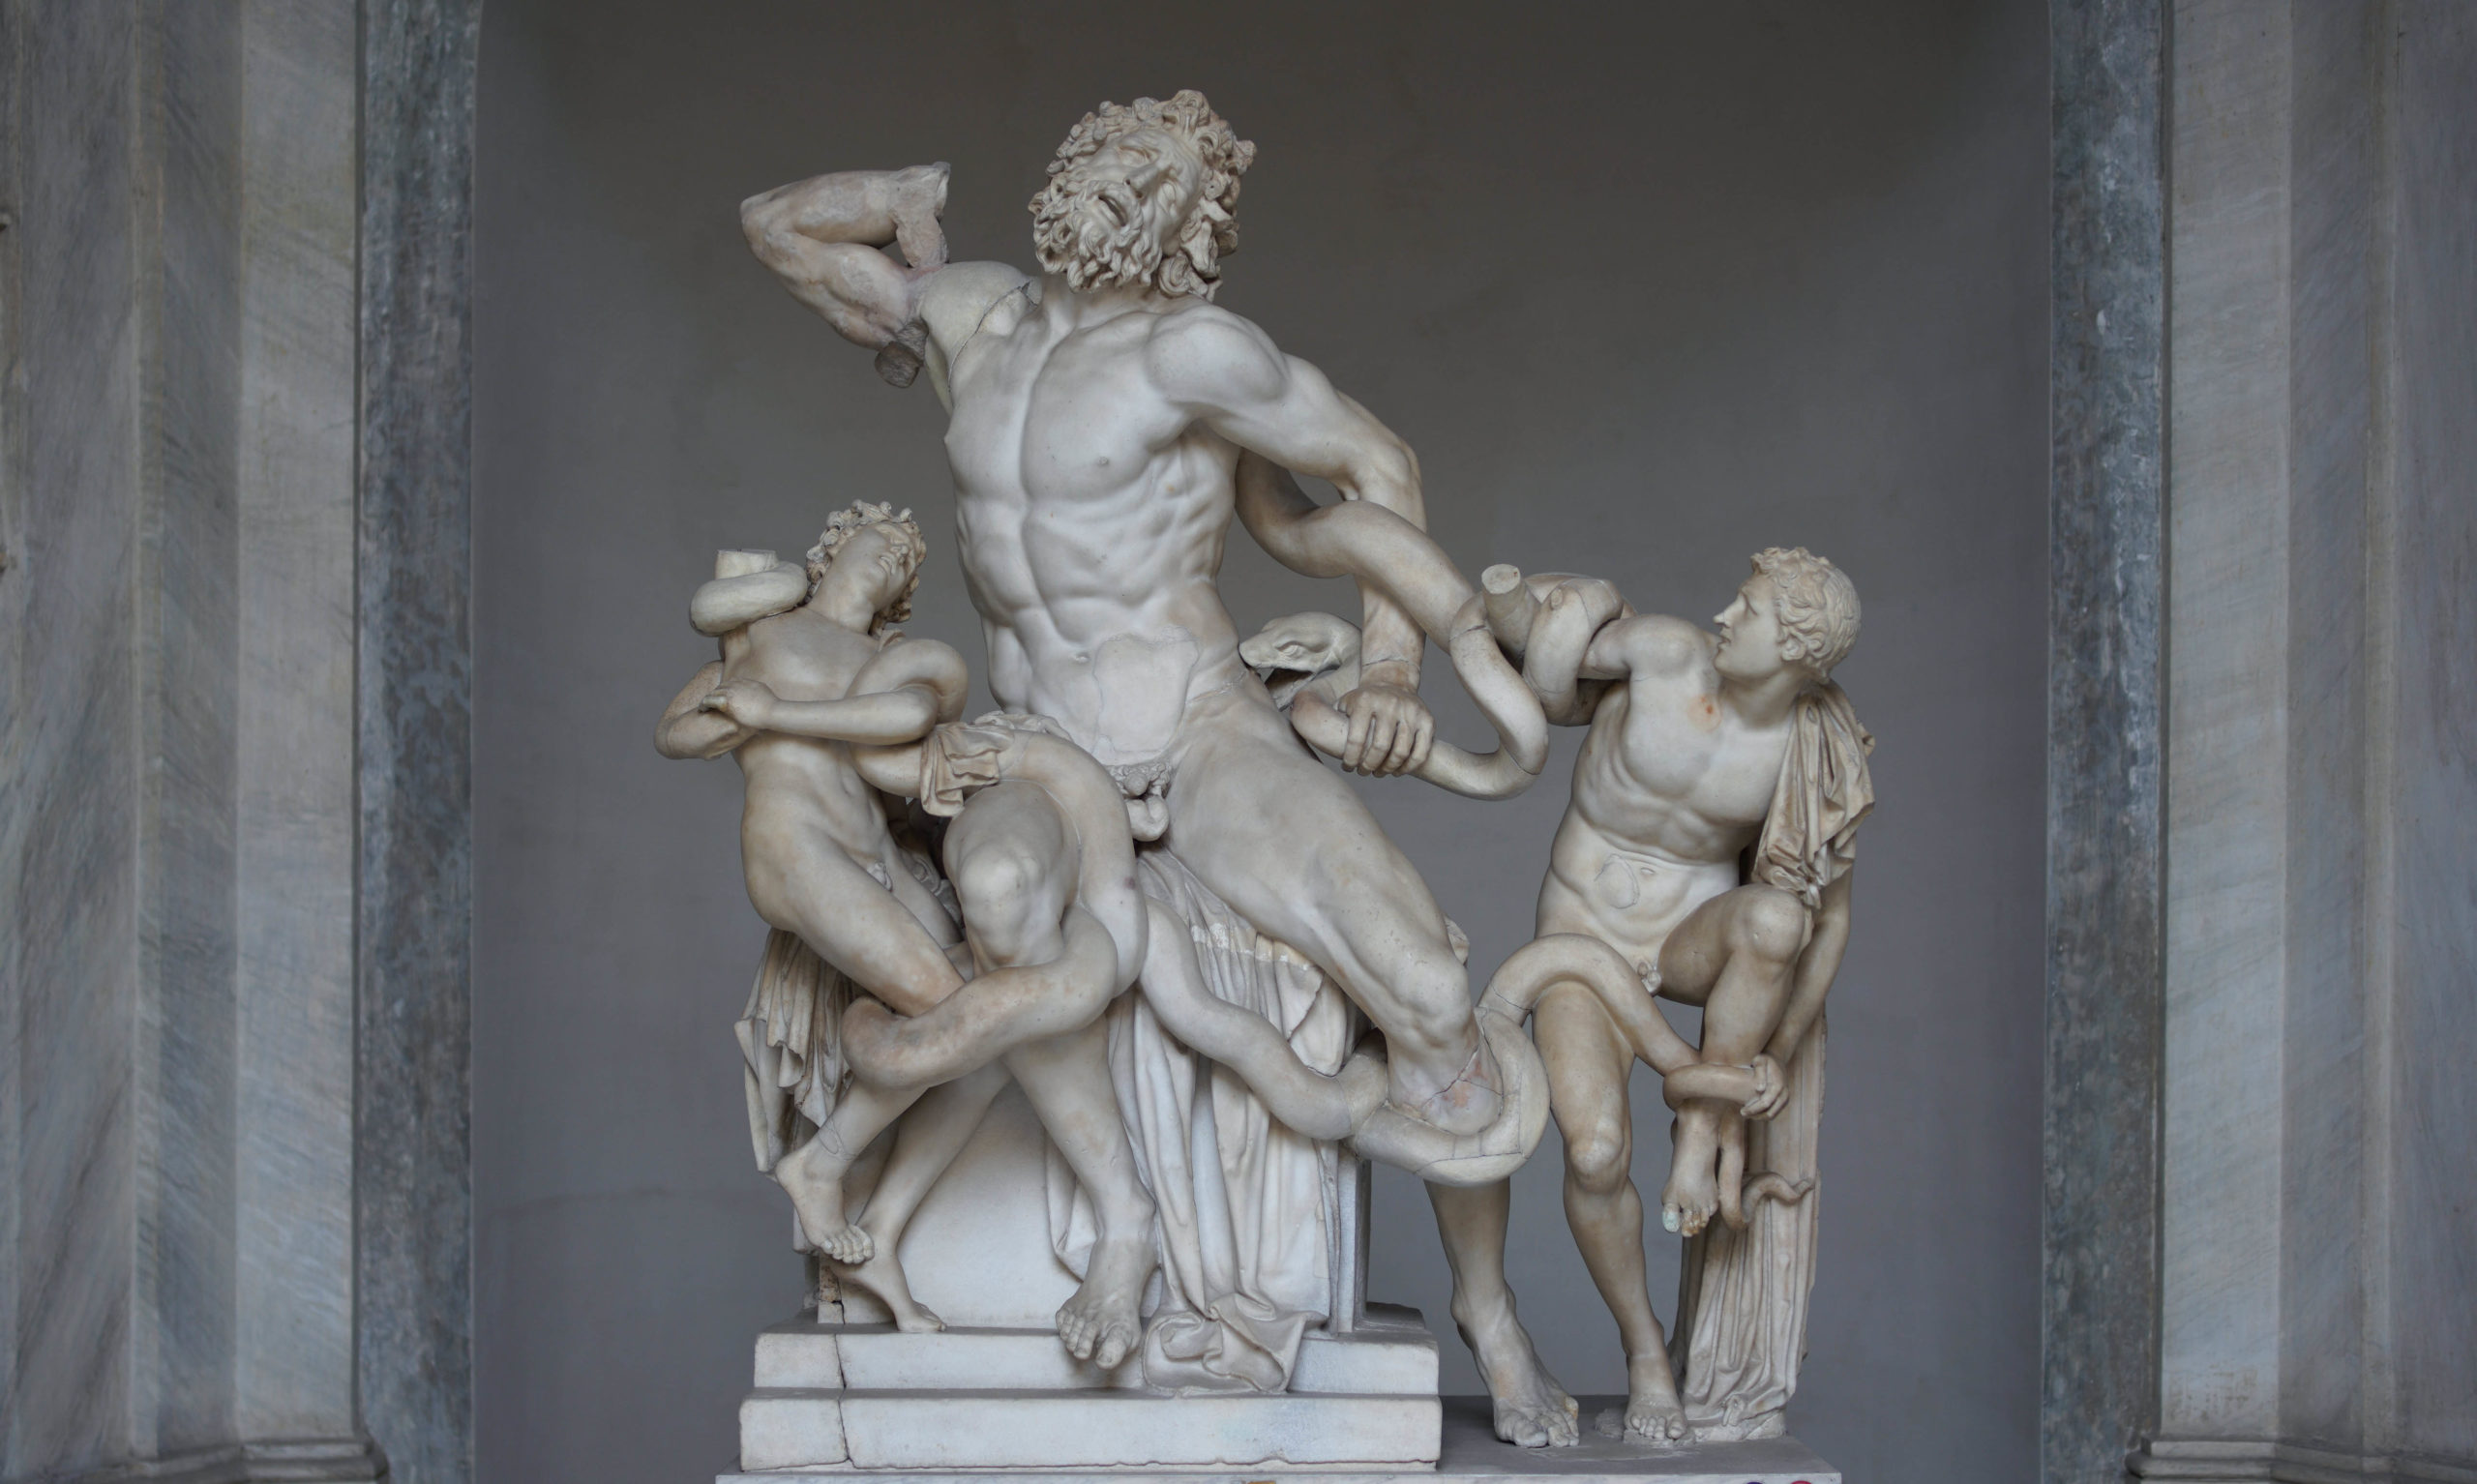 Athanadoros, Hagesandros, and Polydoros of Rhodes, Laocoön and his Sons, early first century C.E., marble, 7'10 1/2" high (Vatican Museums; photo: Steven Zucker, CC BY-NC-SA 2.0)